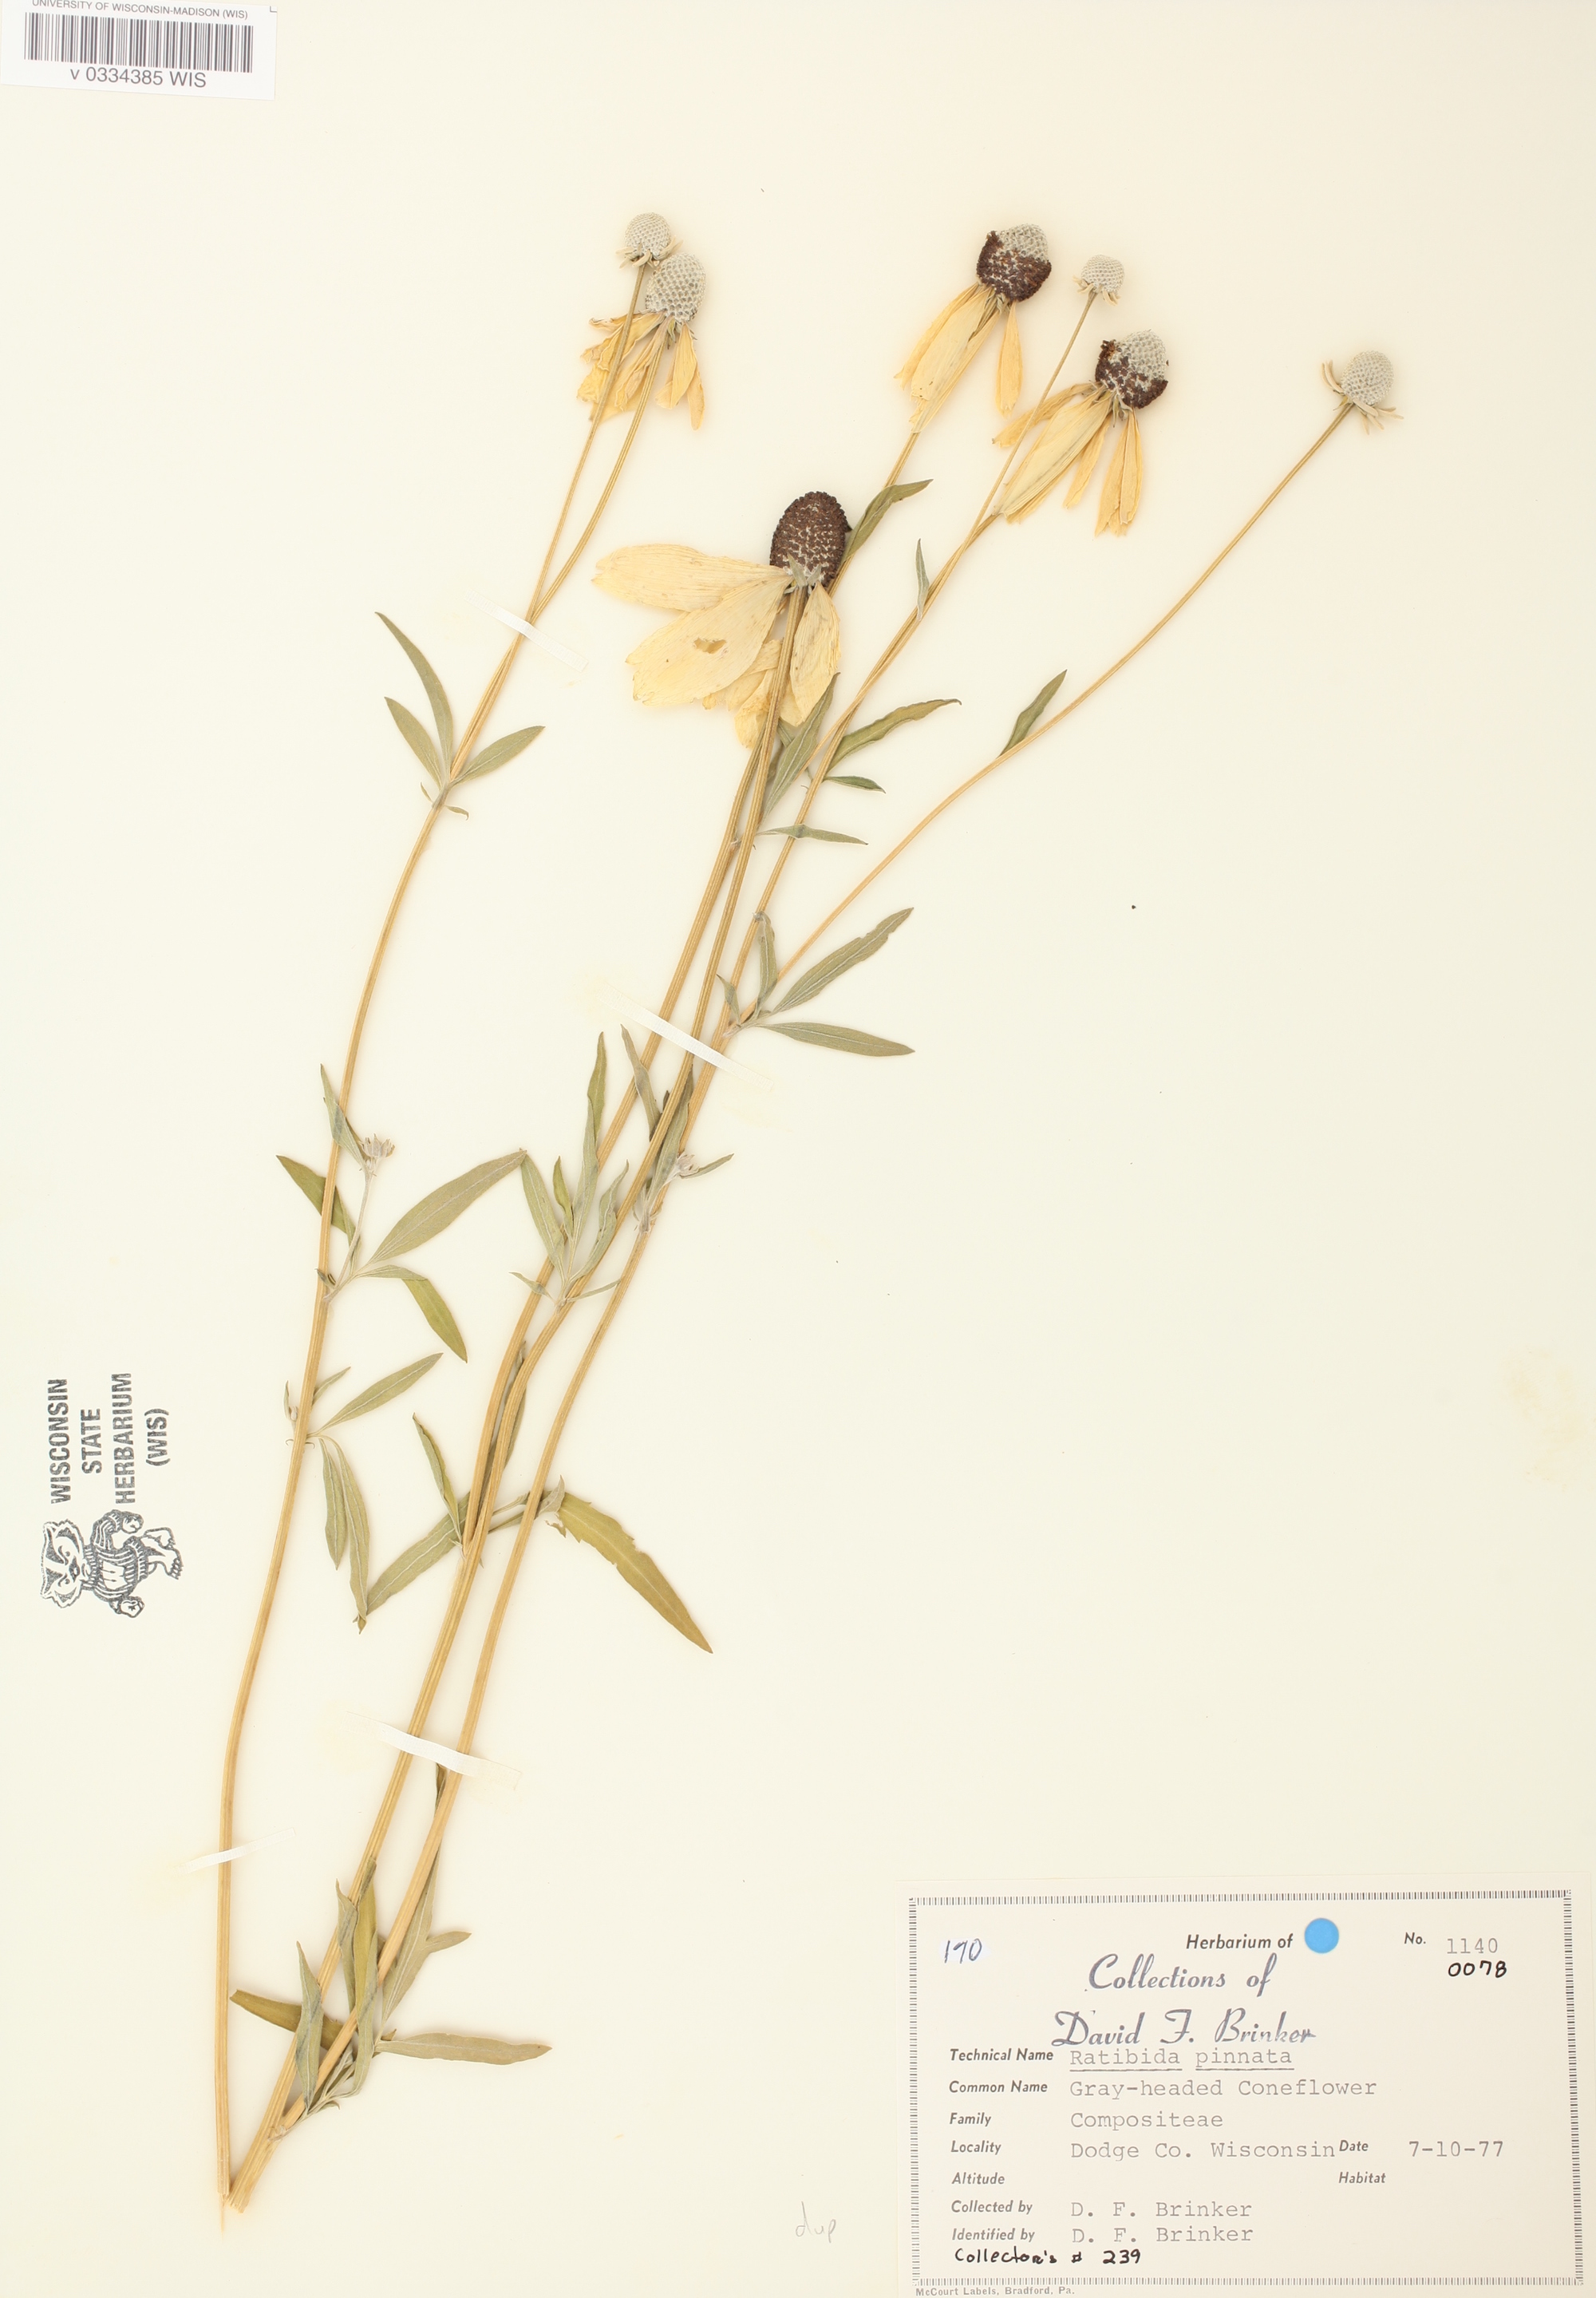 Gray-headed coneflower specimen collected in Dodge County, Wisconsin on July 10, 1977.